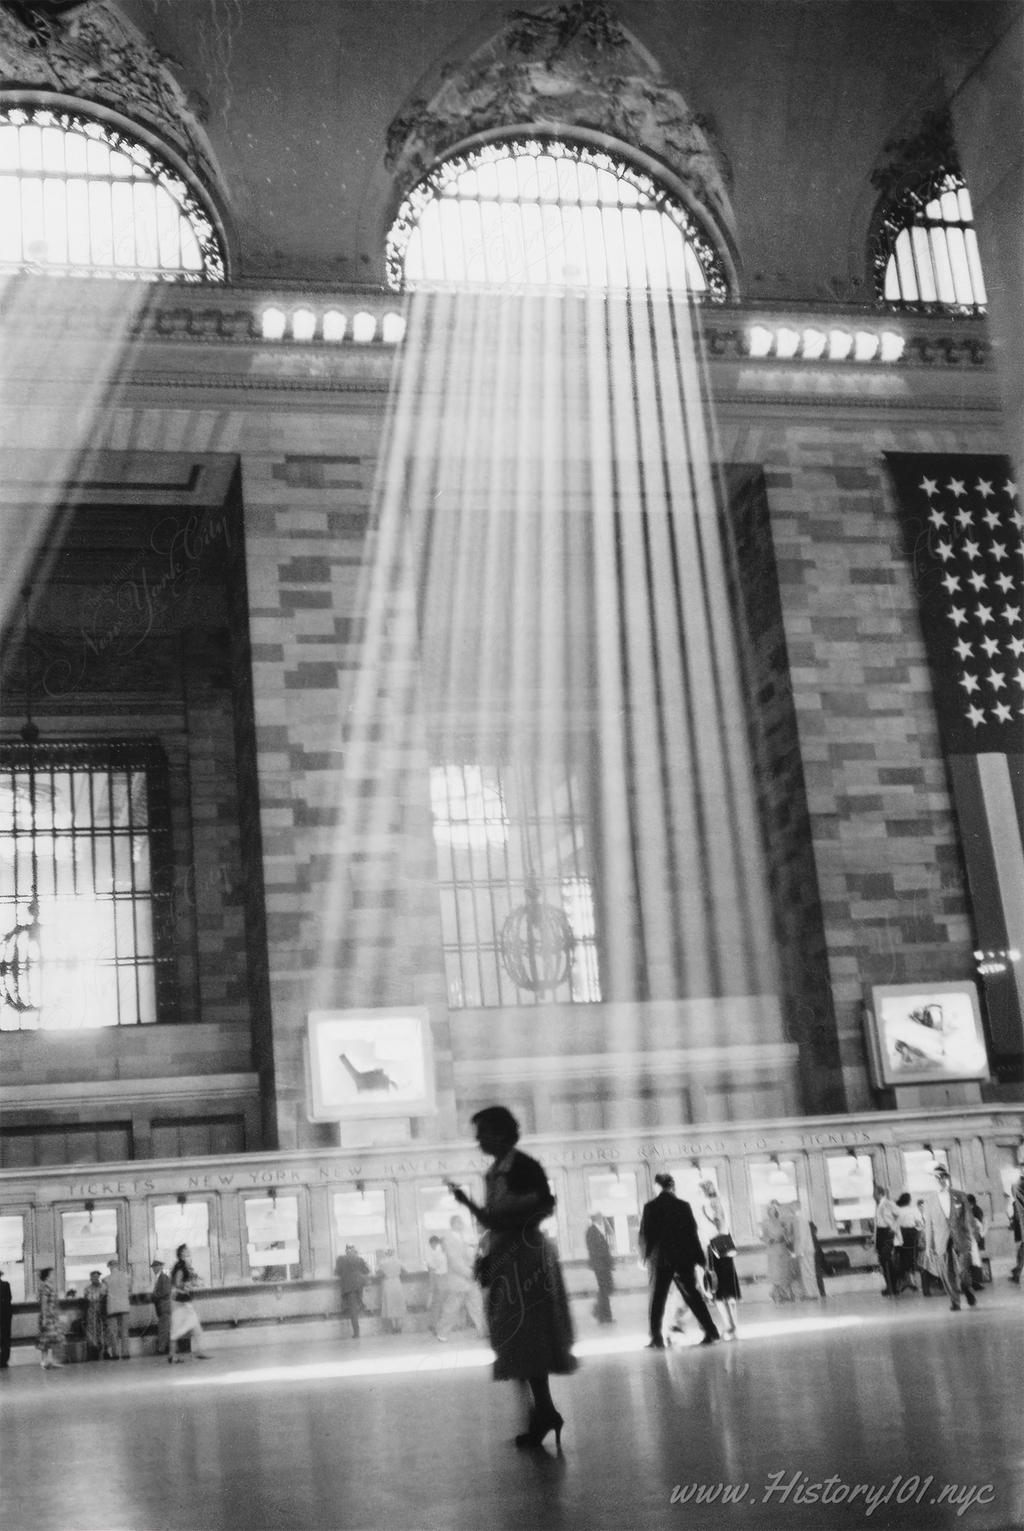 Photograph shows the interior of main concourse of Grand Central Terminal with sunlight streaming through windows of main concourse.